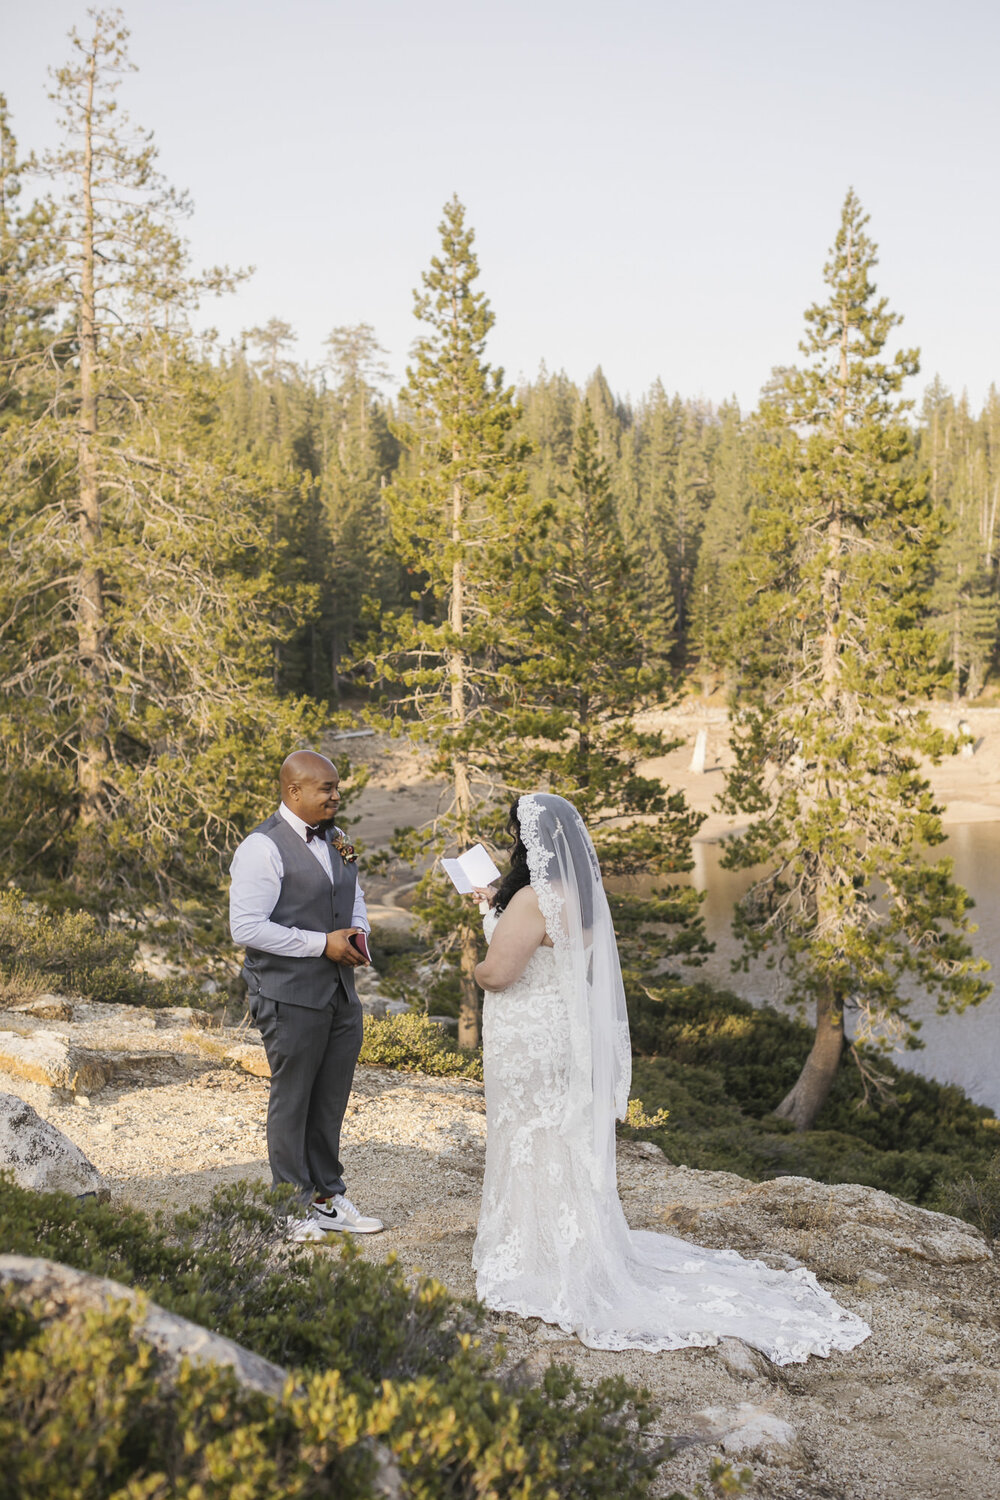 Wedding couple read from their vow books during their elopement in the forest